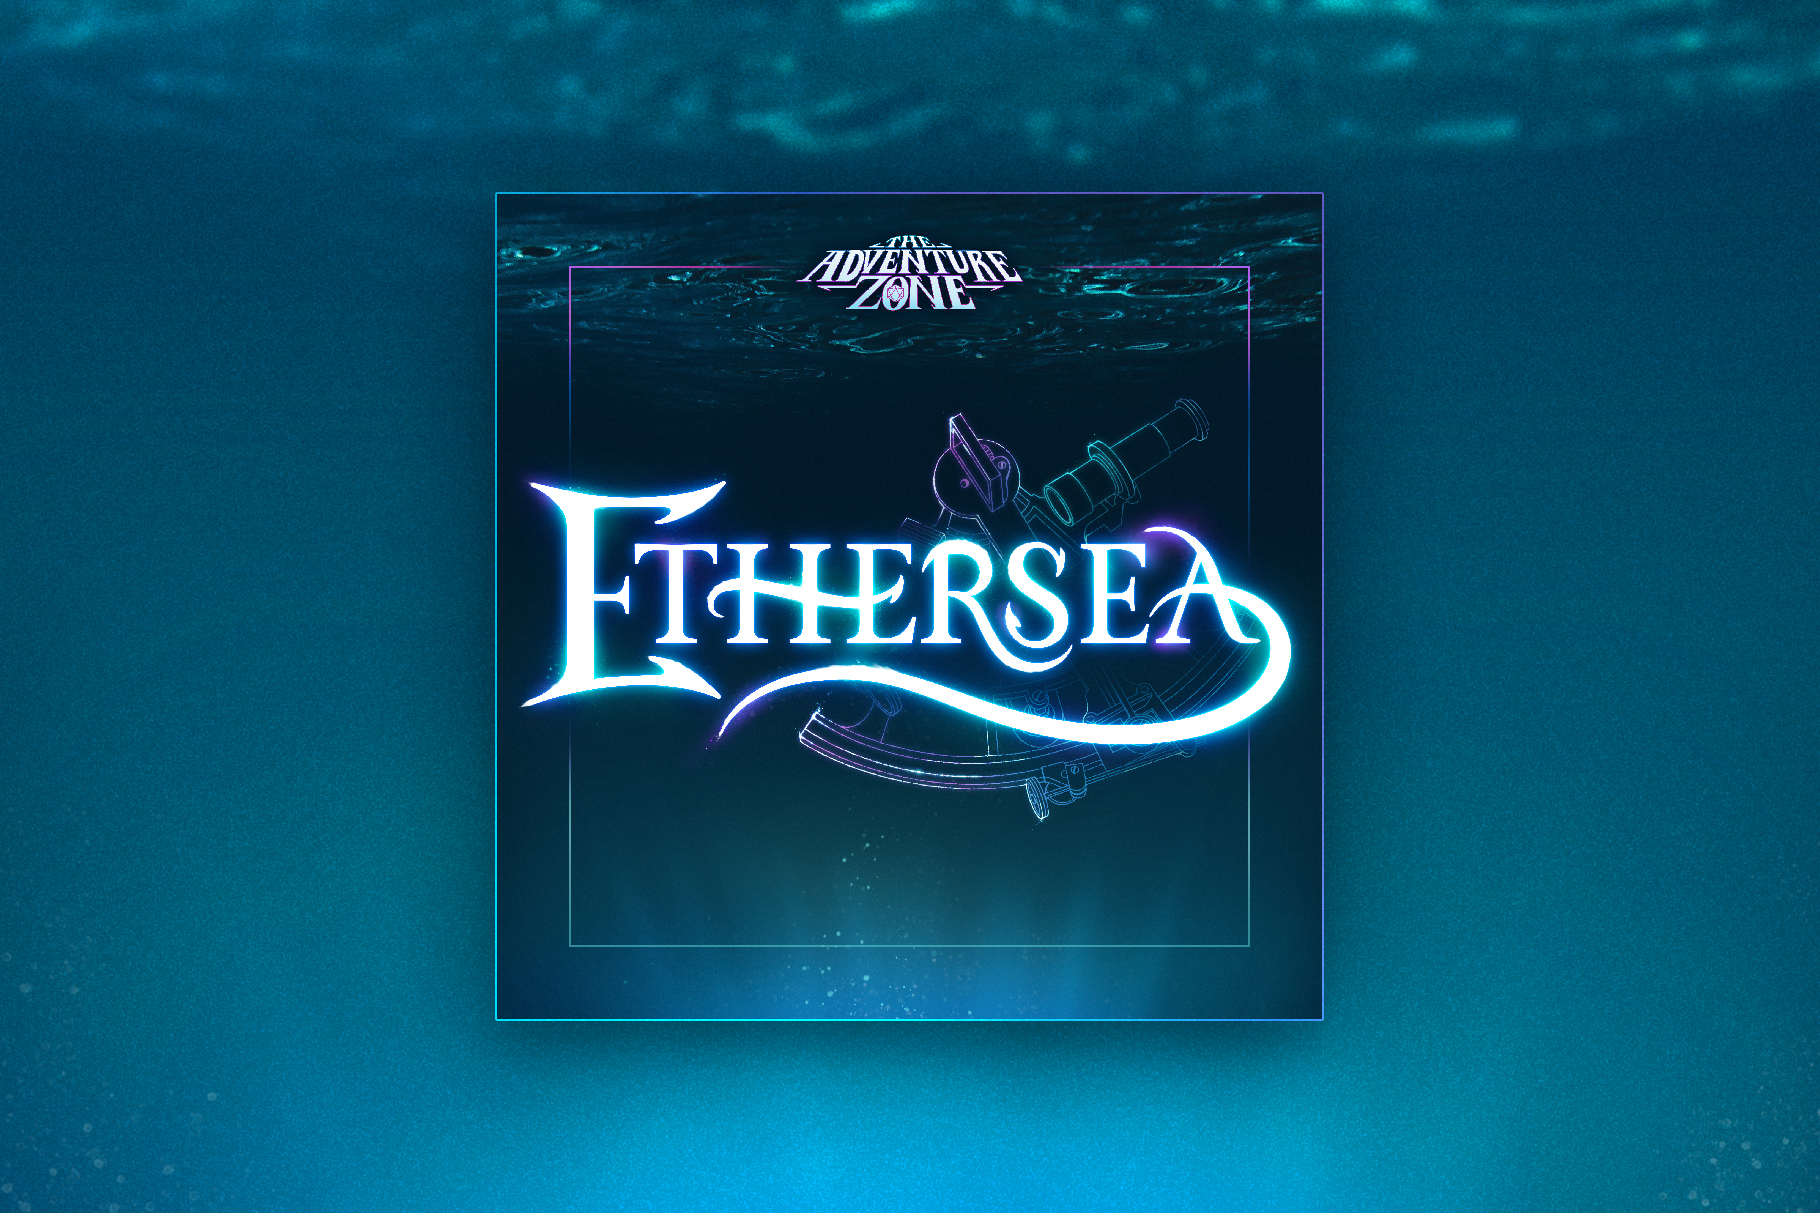 The Adventure Zone Ethersea cover art is shown on a background of water. The cover features The Adventure Zone logo at the top, and the word “Ethersea” in the center, with an illustrated sextant behind it.